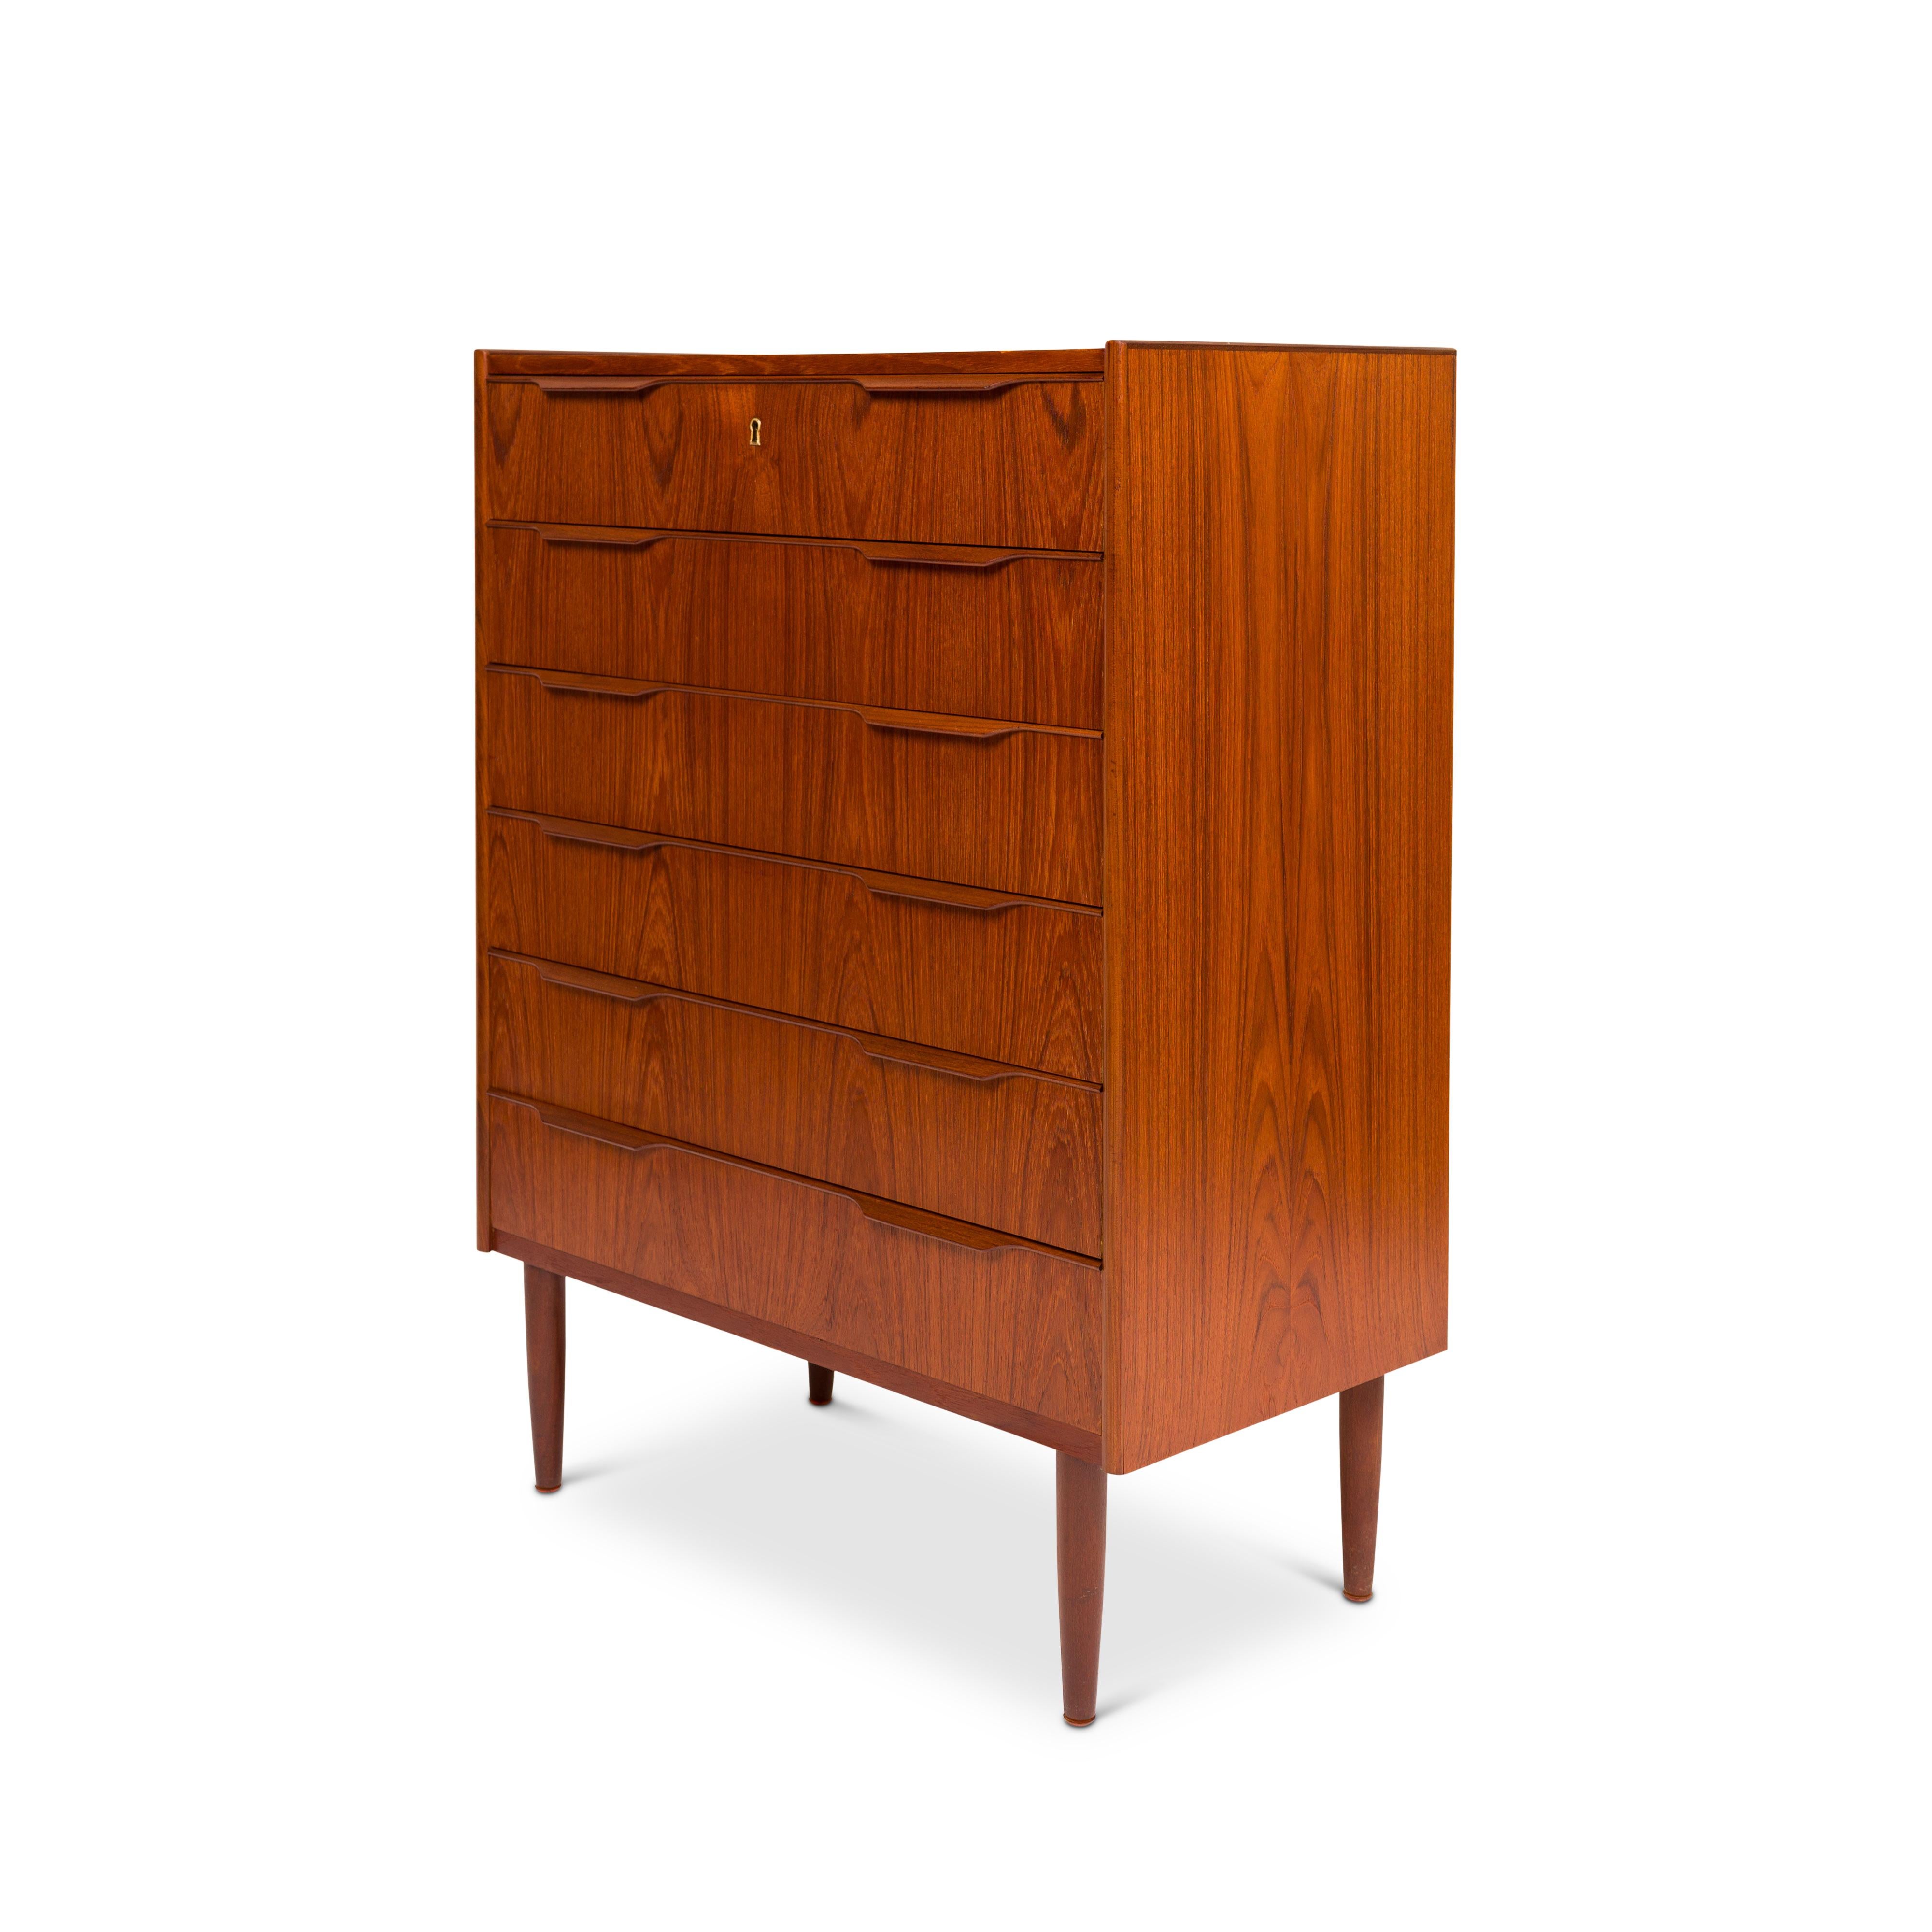 Crafted with meticulous artistry in 1960s Denmark, this stunning modern Danish mid-century Teak Tallboy stands as a testament to unparalleled craftsmanship. Its allure lies in the exquisite teak wood-grain detailing that adorns the tallboy dresser,